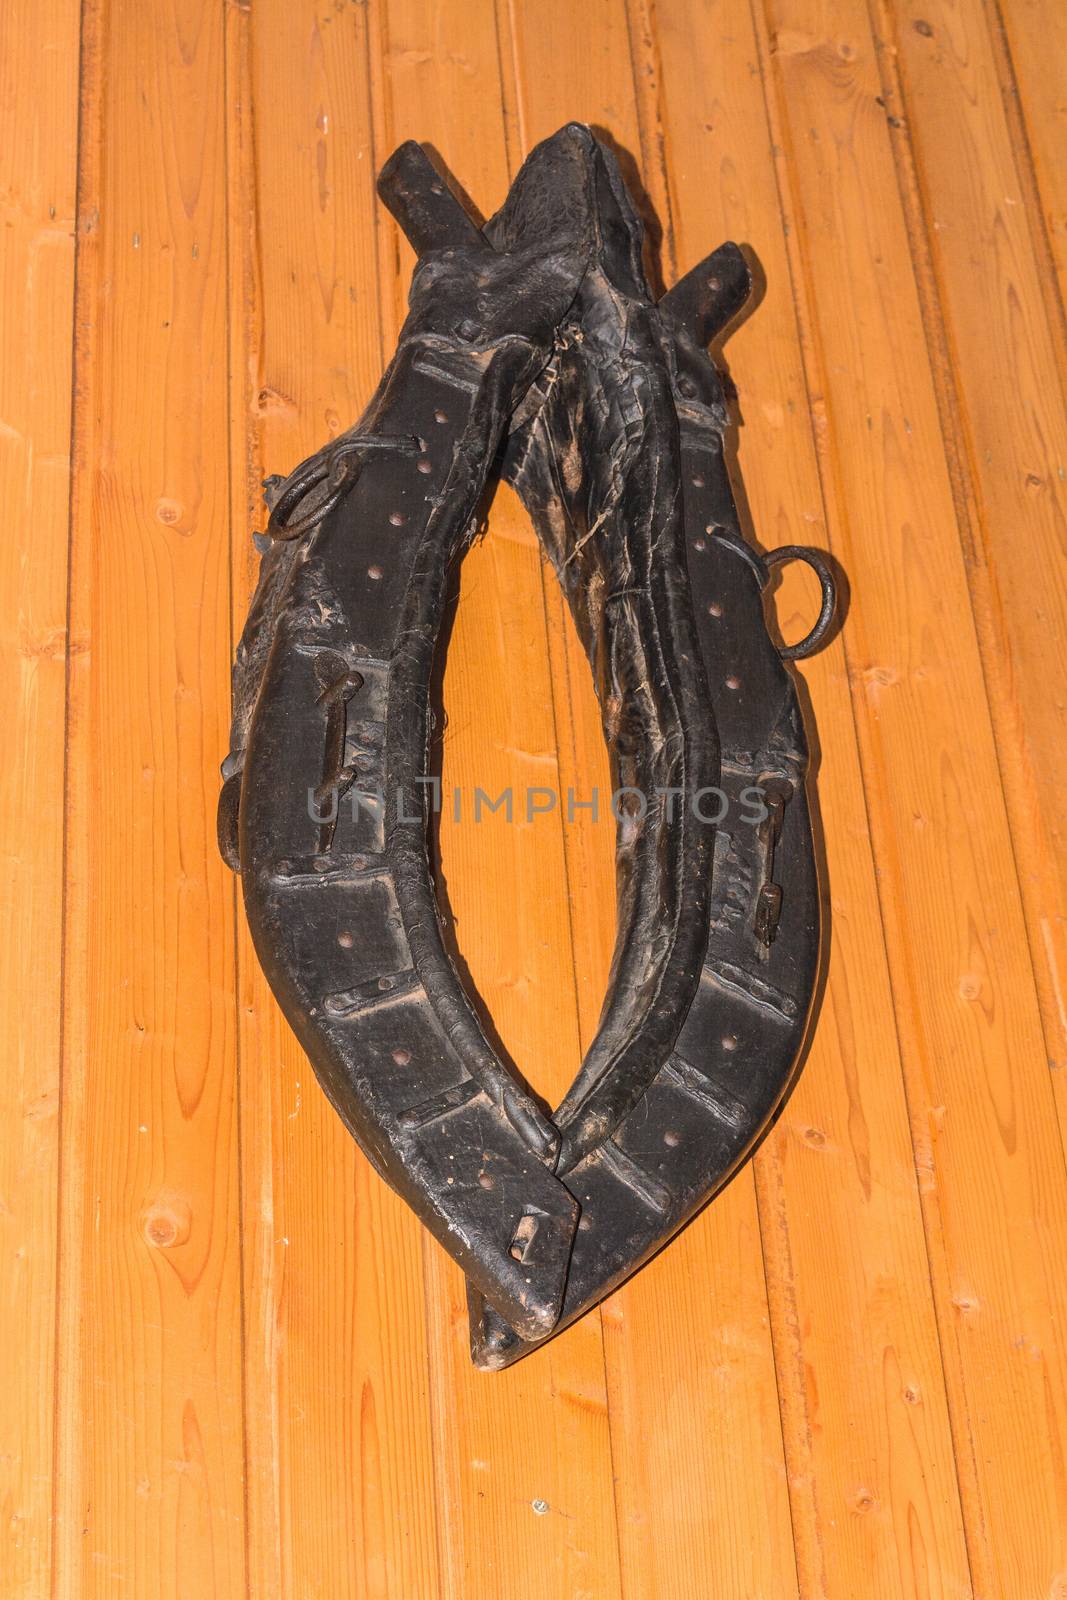 Horse collar hanging on a wooden wall.